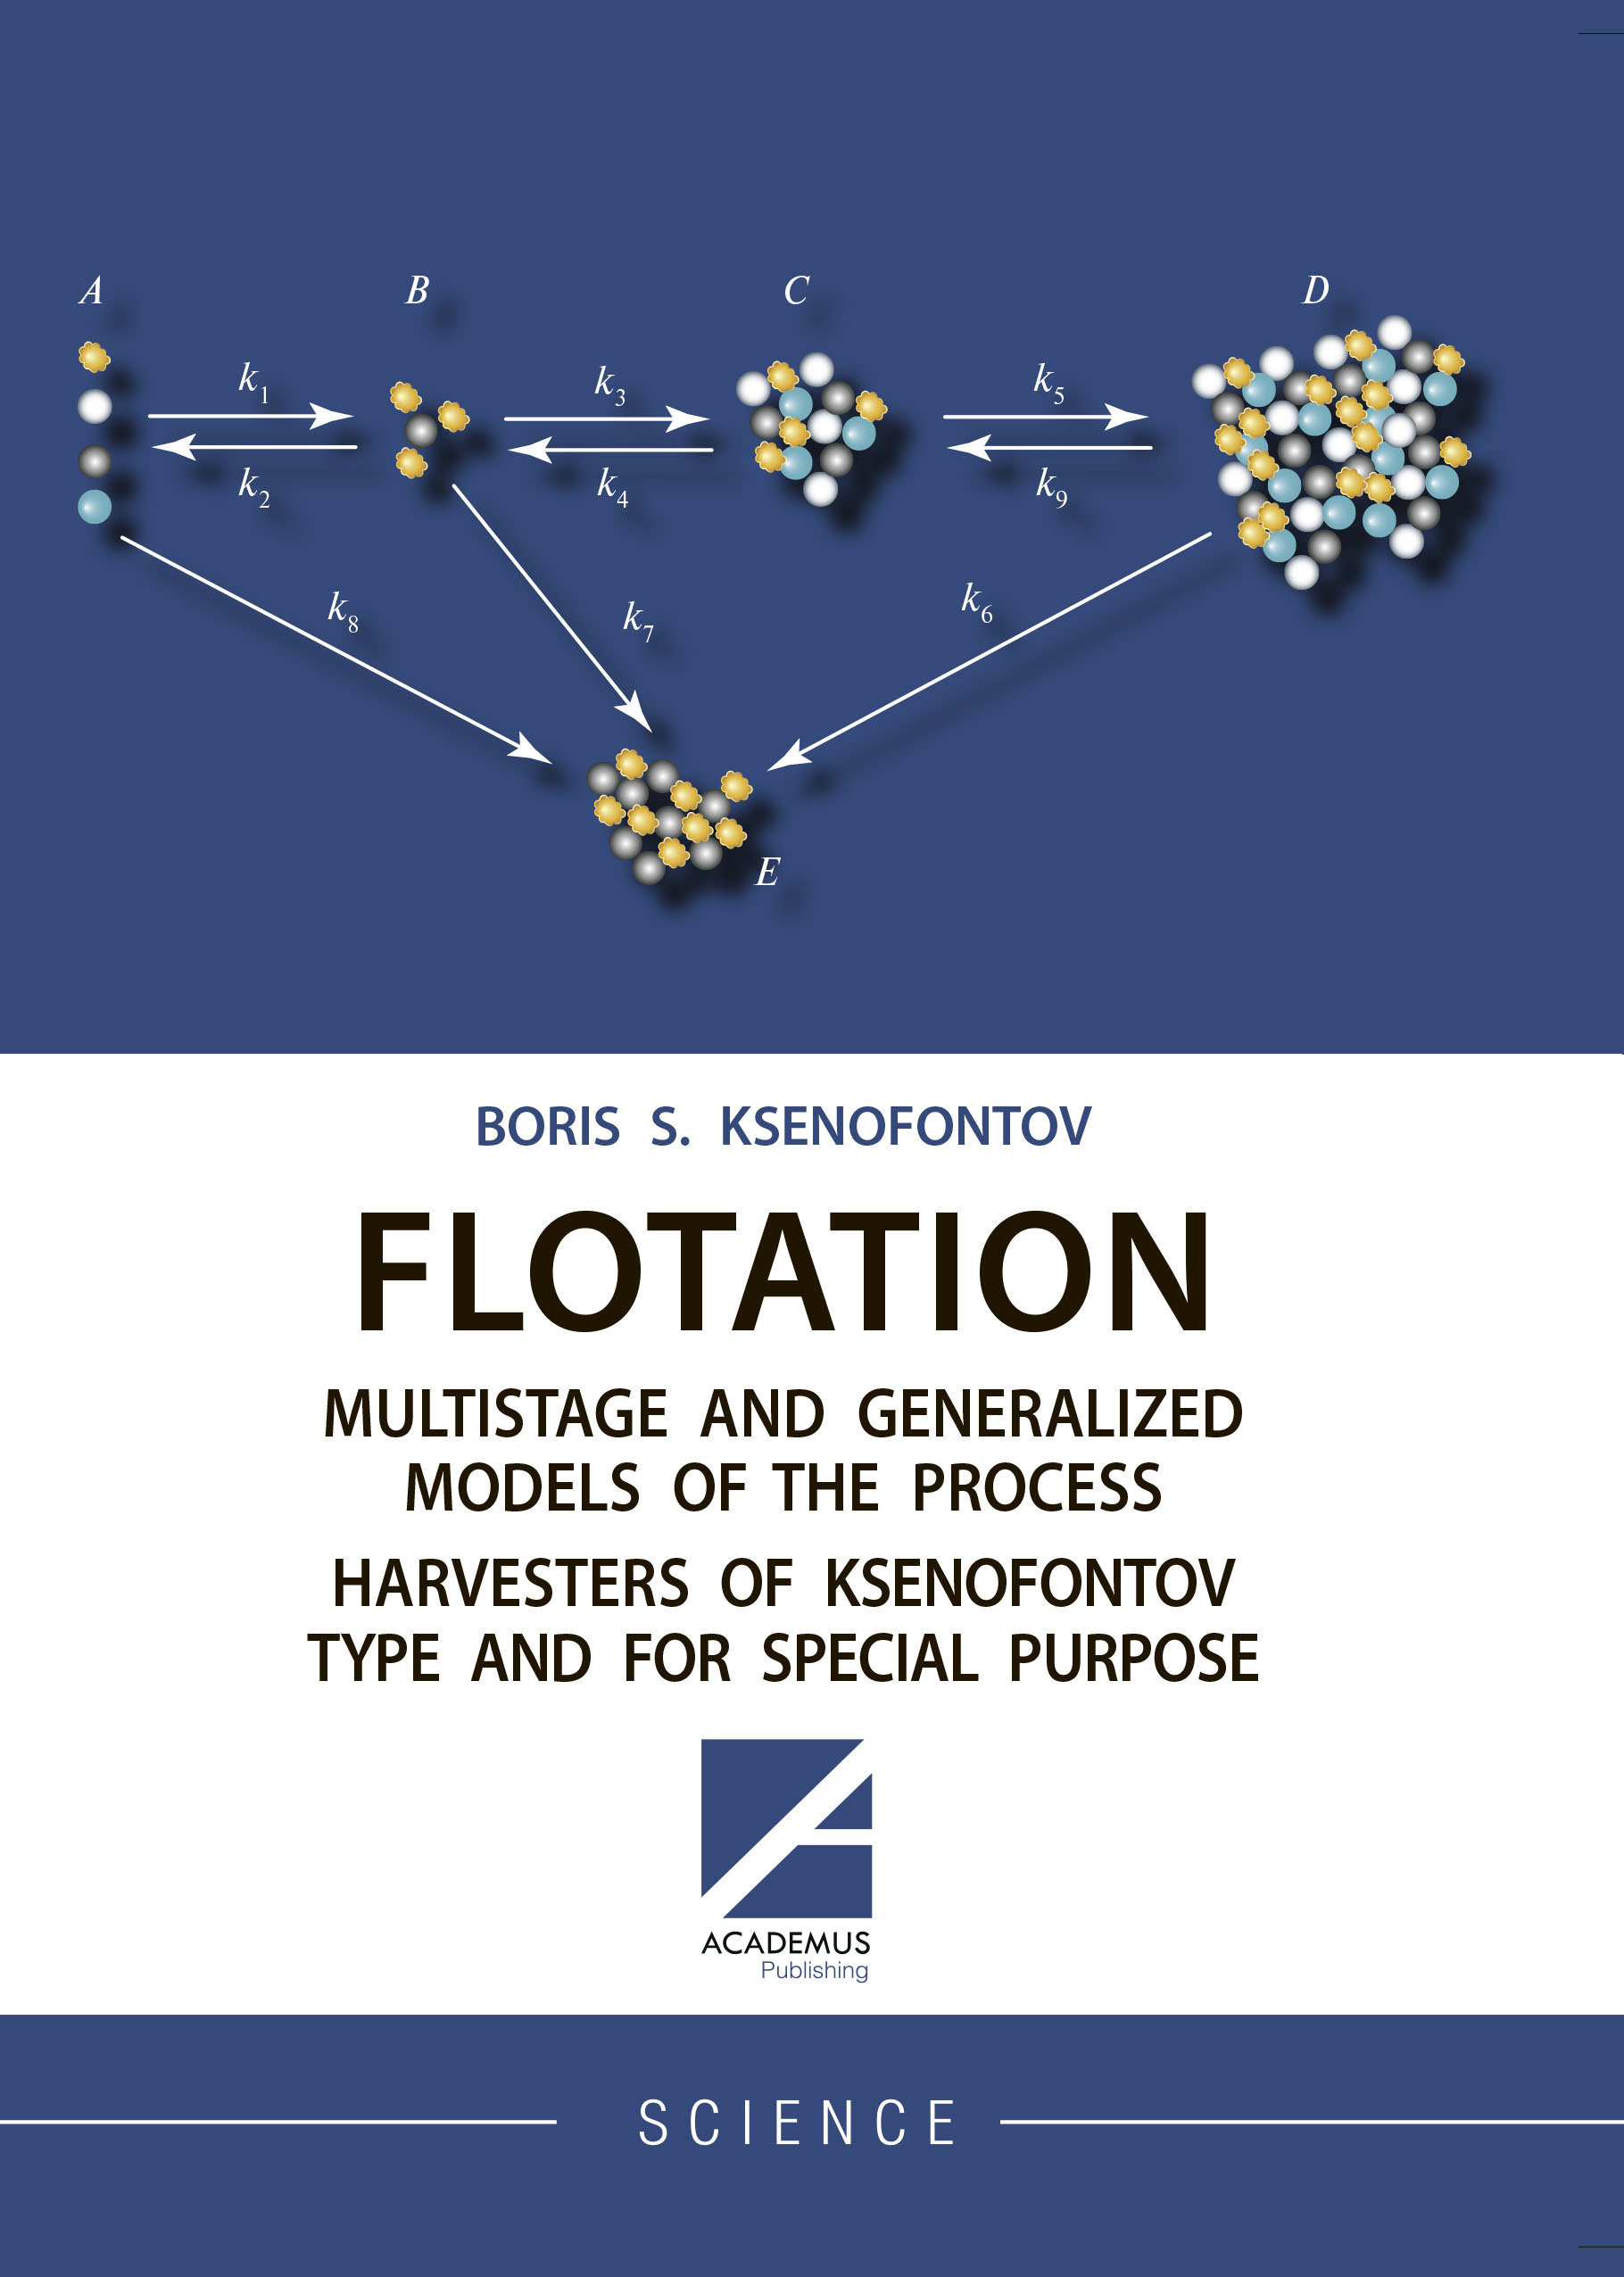             FLOTATION MULTISTAGE AND GENERALIZED MODELS OF THE PROCESS HARVESTERS OF KSENOFONTOV TYPE AND FOR SPECIAL PURPOSE
    